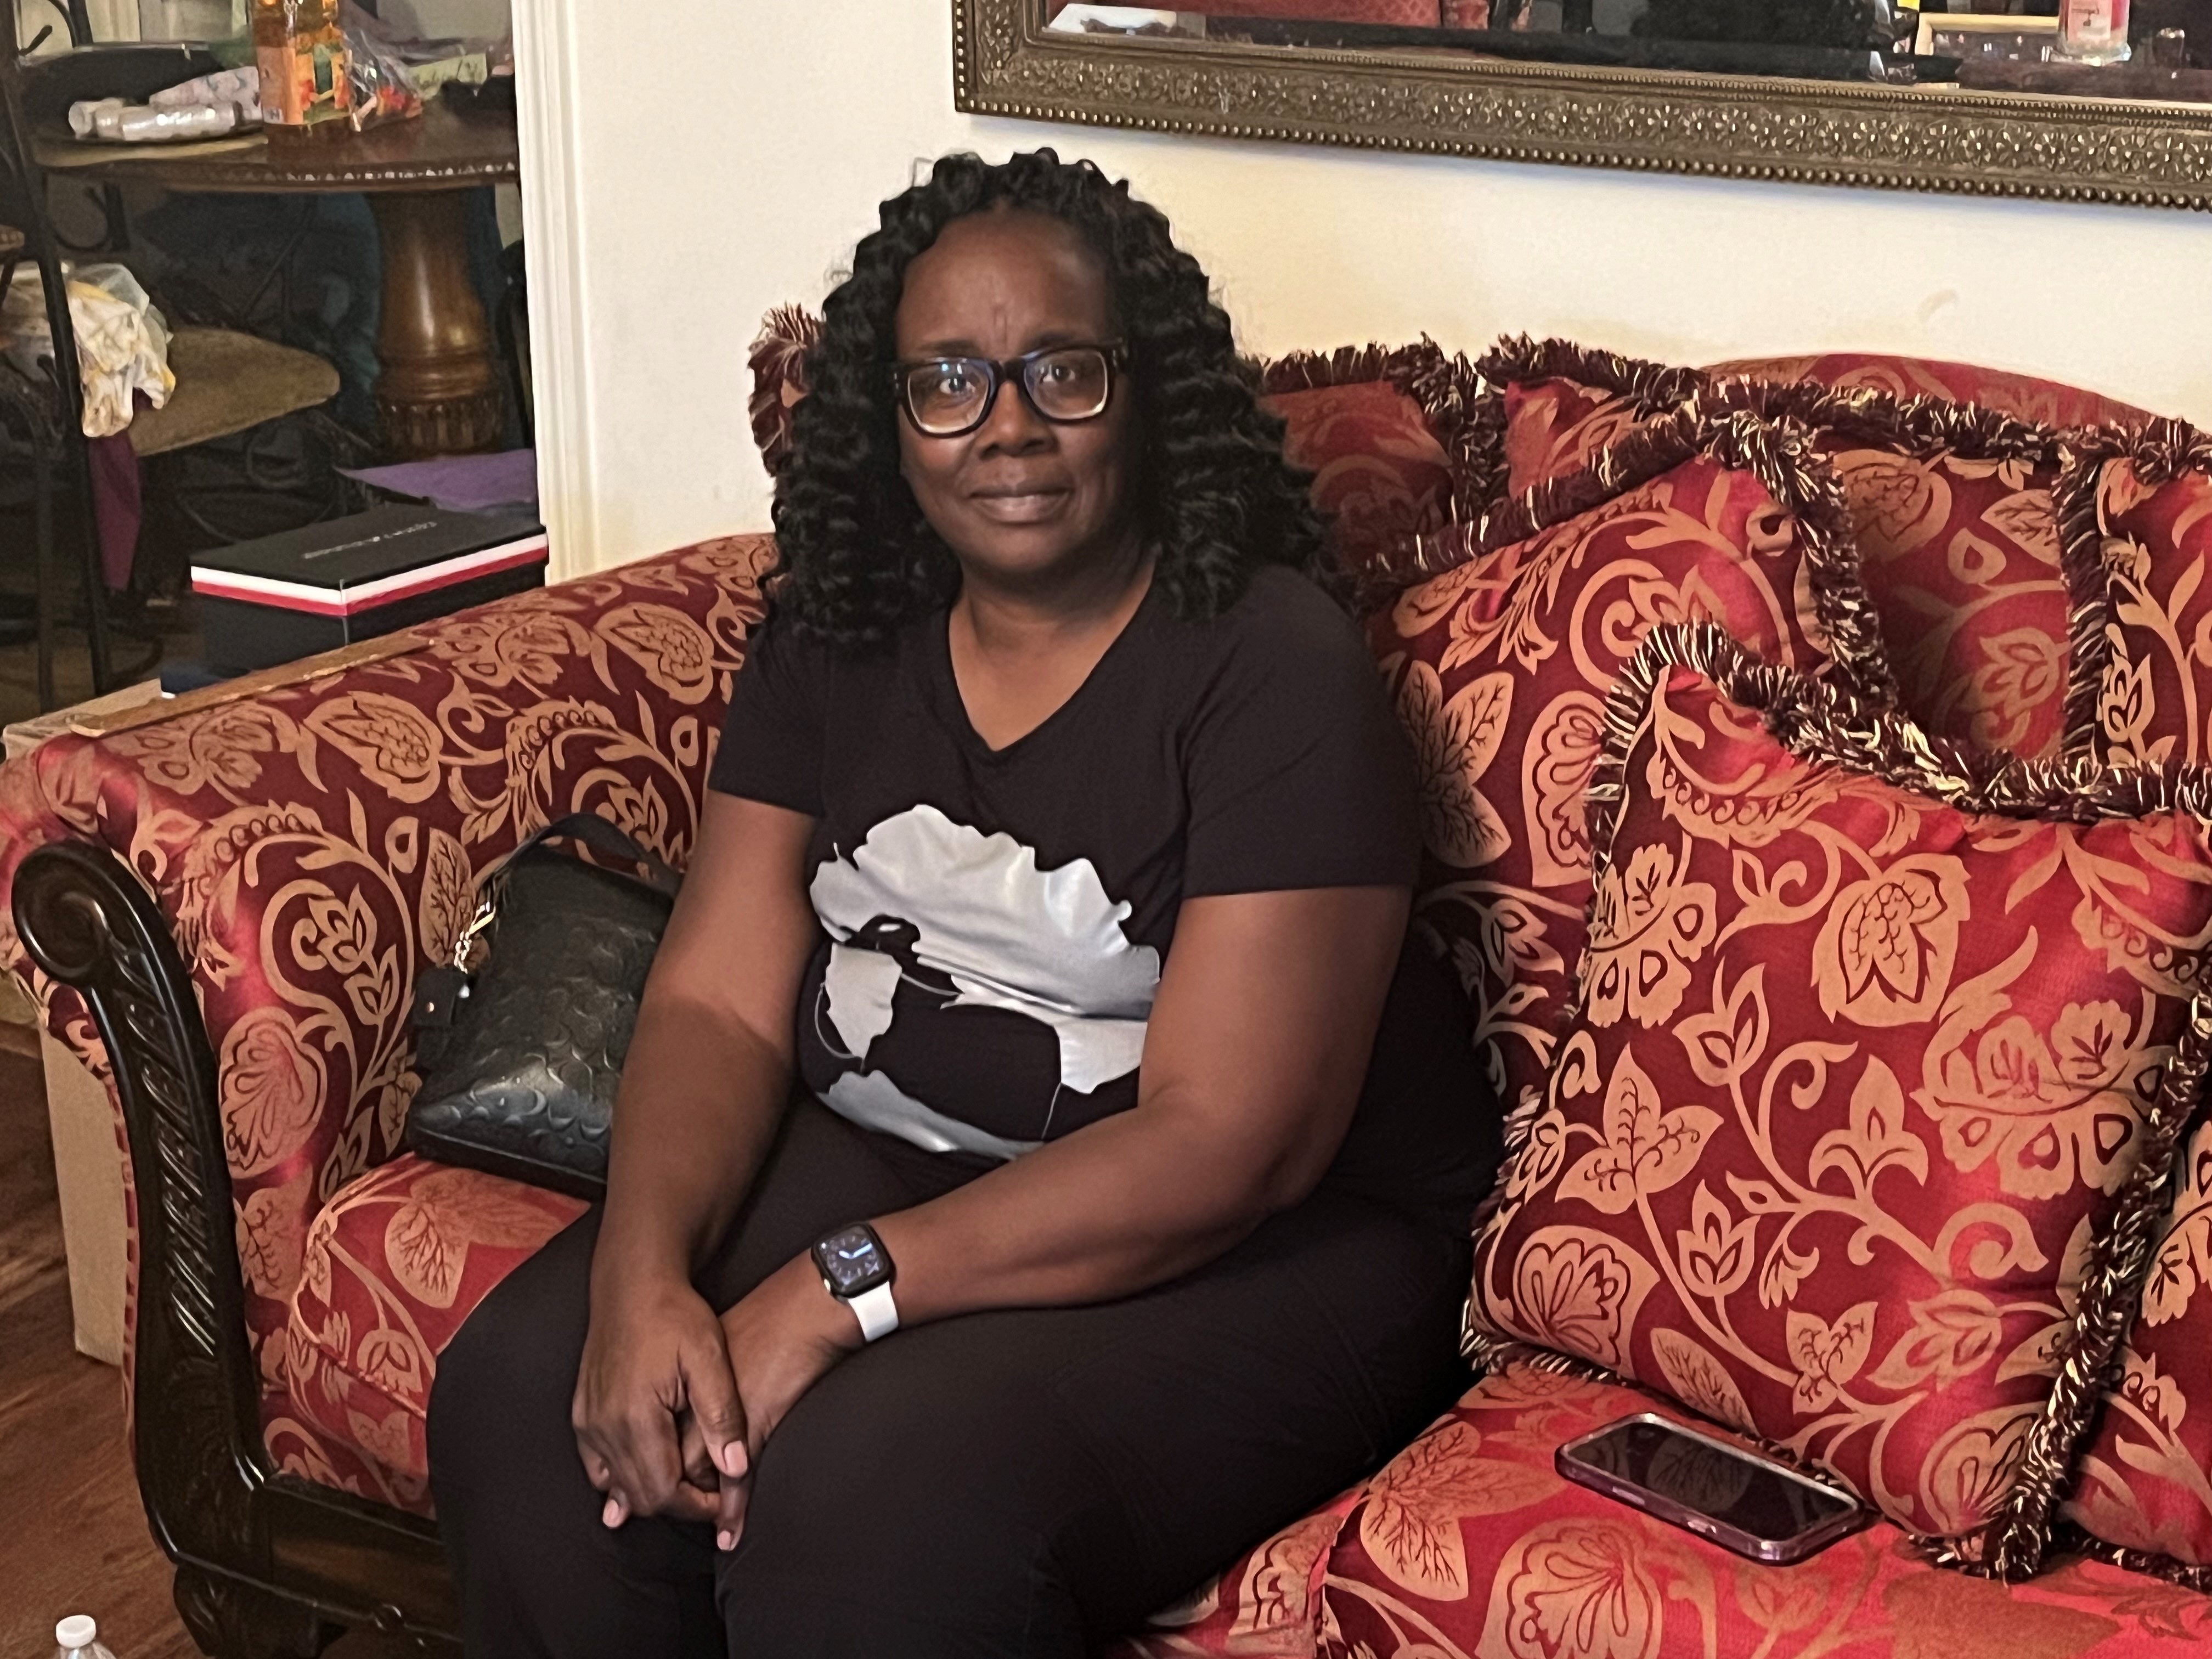 A woman in a black tshirt and glasses is seated on a red couch, looking at the camera